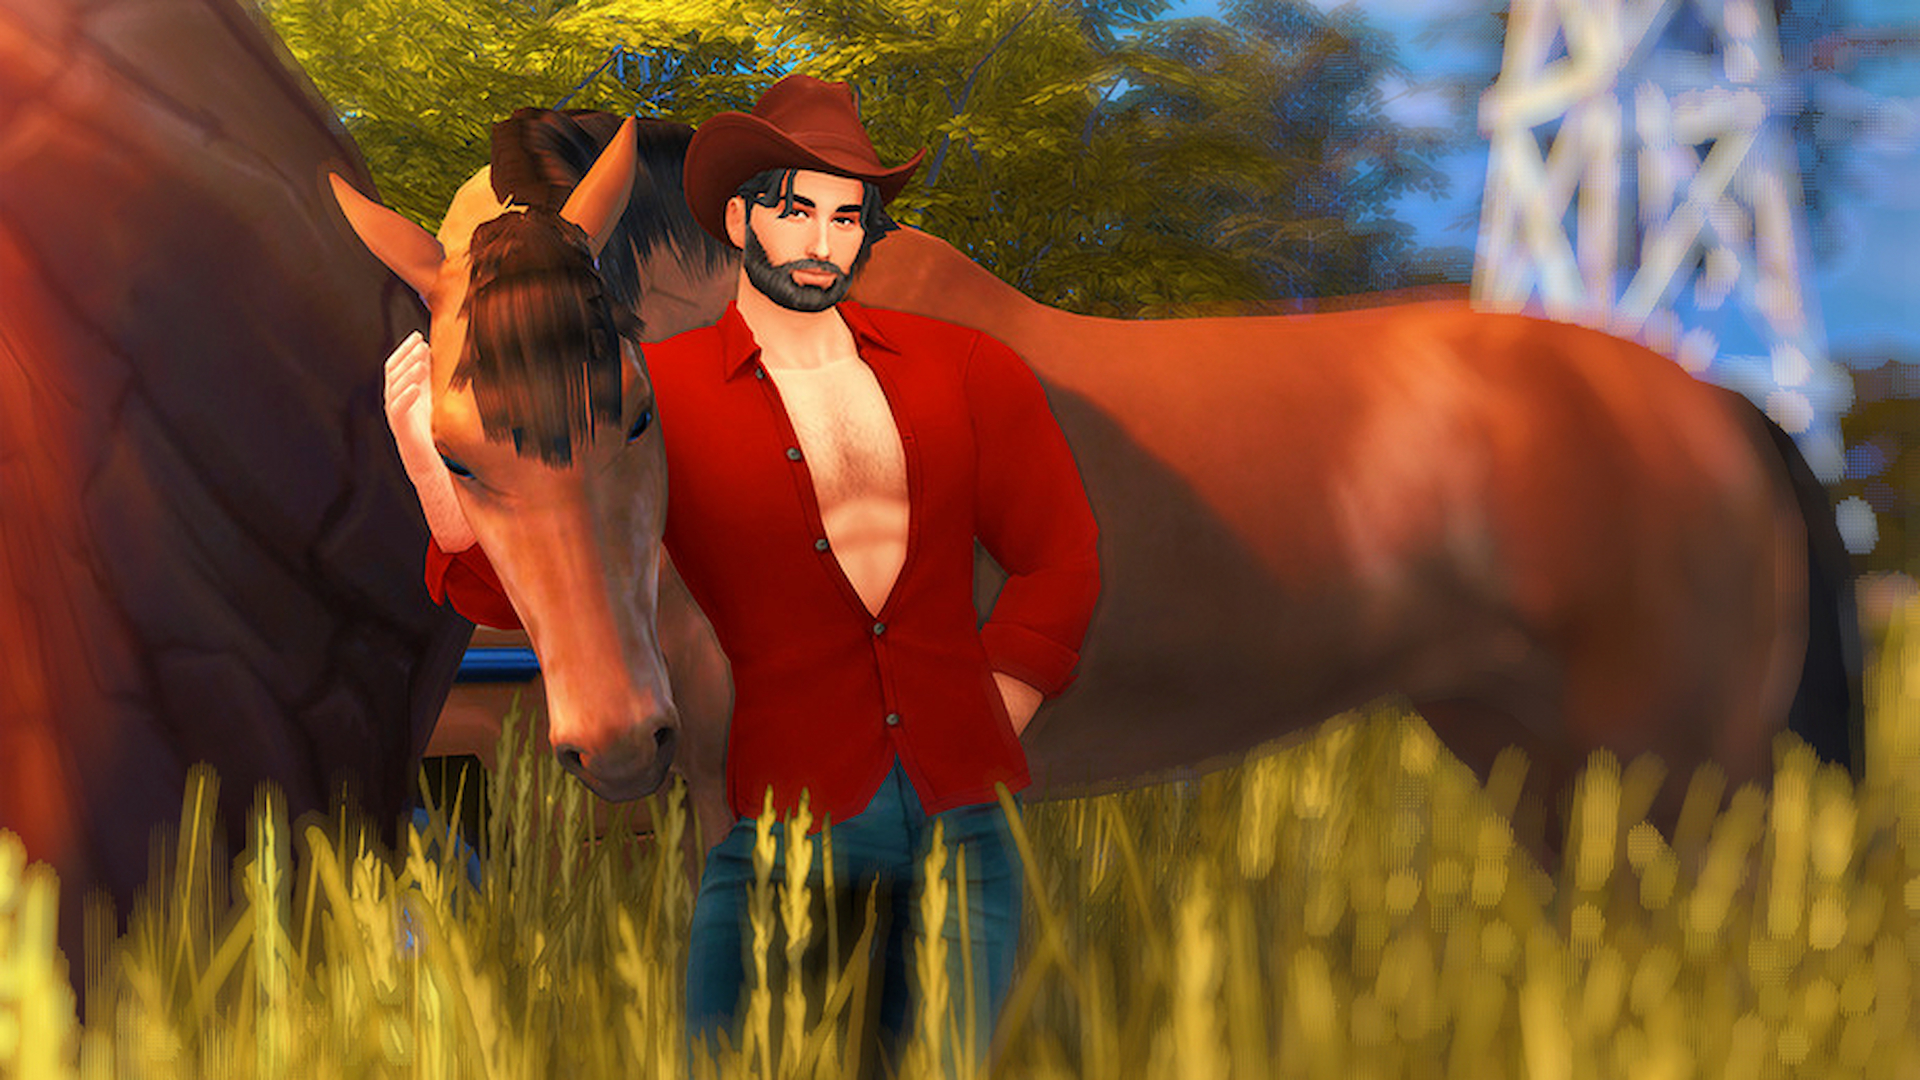 The Sims 4 releases huge, free update to celebrate horse expansion